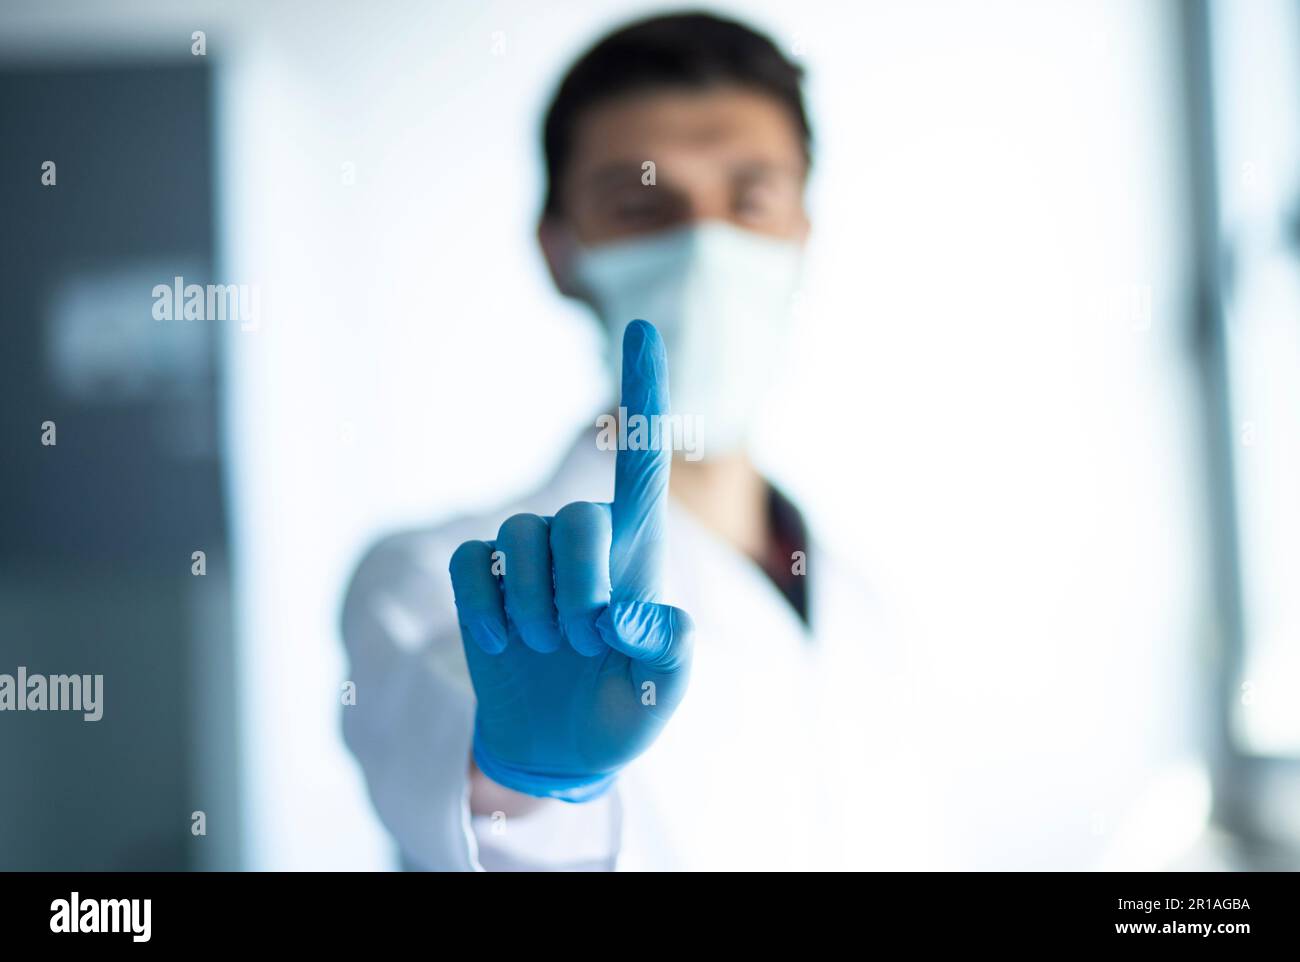 A medical doctor in protective gloves holding up an index finger while standing in a hospital setting Stock Photo